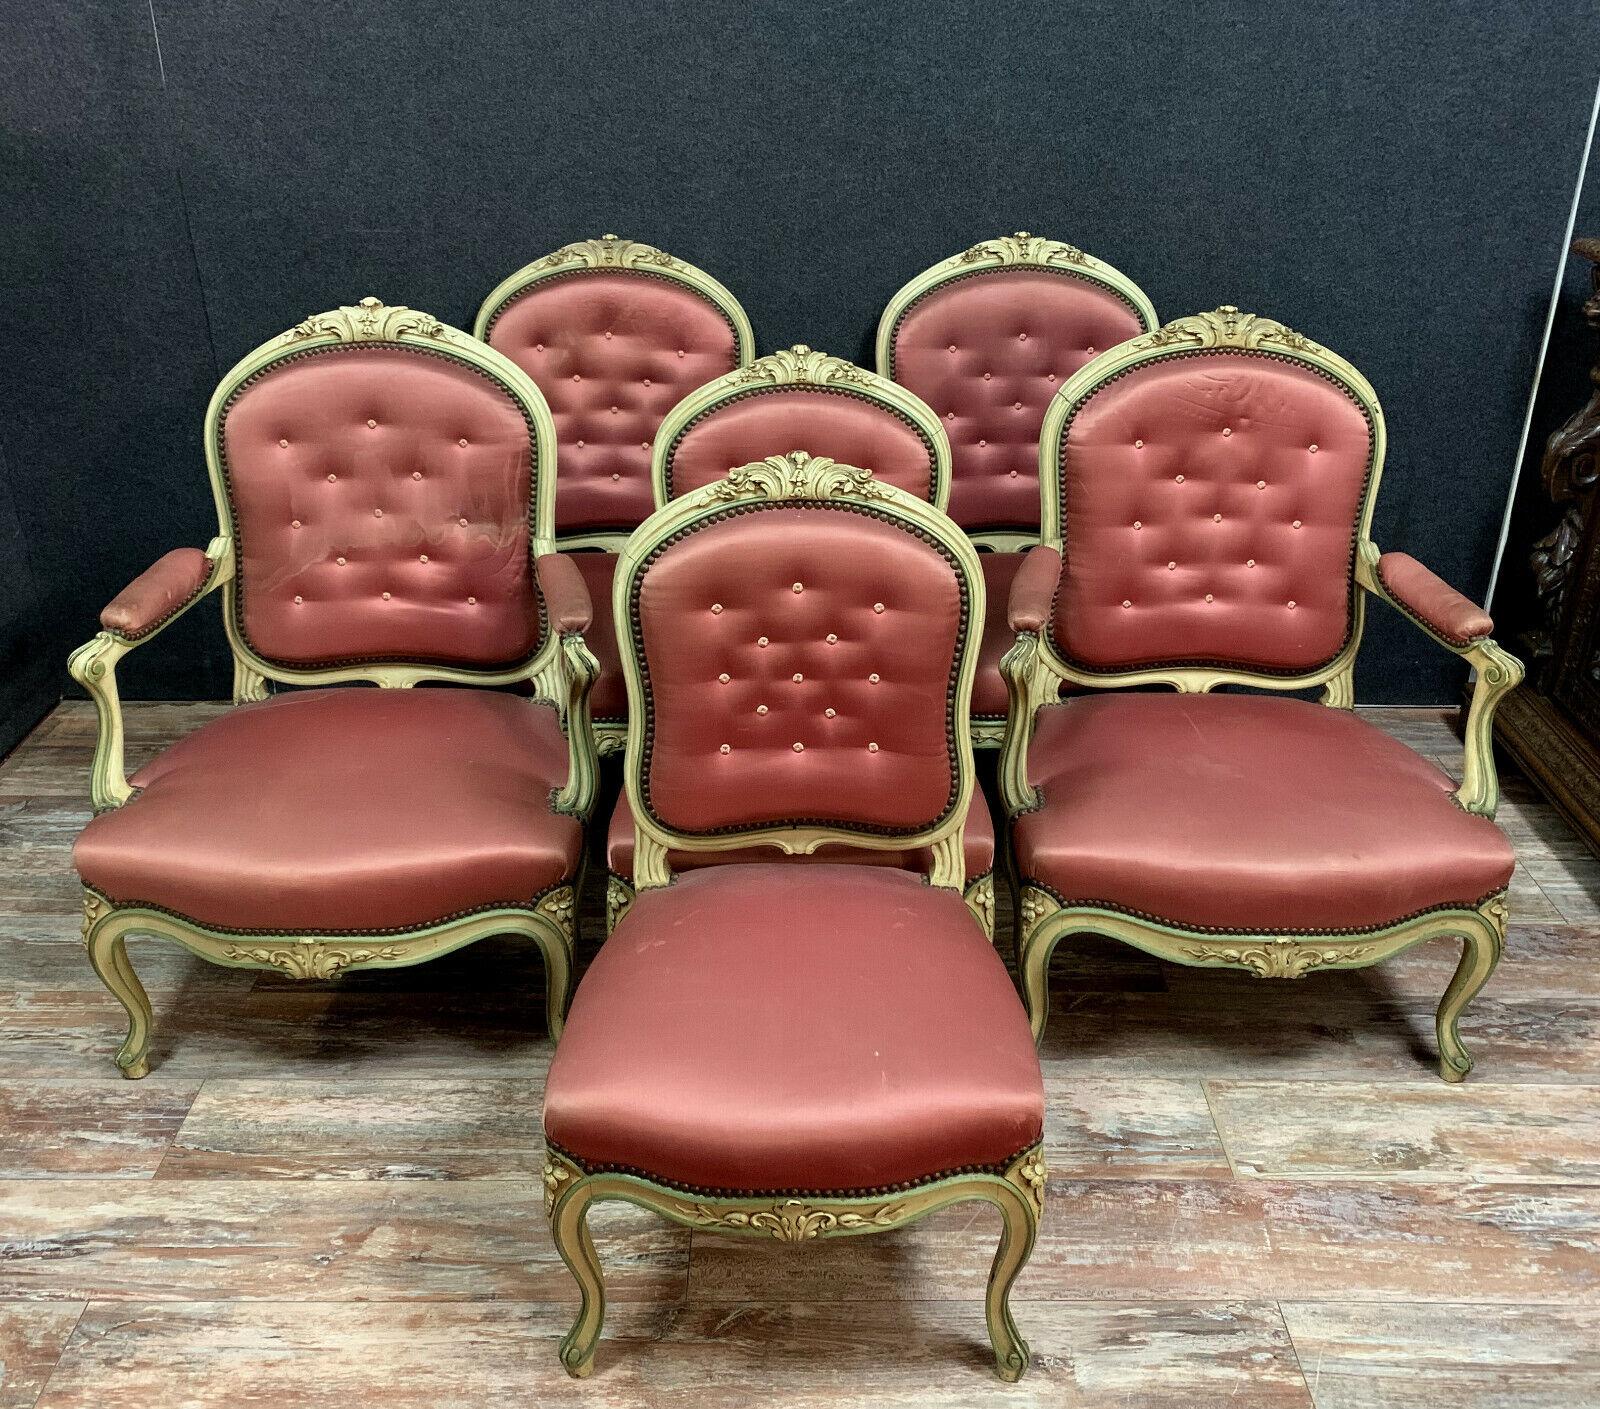 Louis XV Lacquered Wood Salon Furniture Set with 4 Armchairs and 2 Chairs -1X01 4